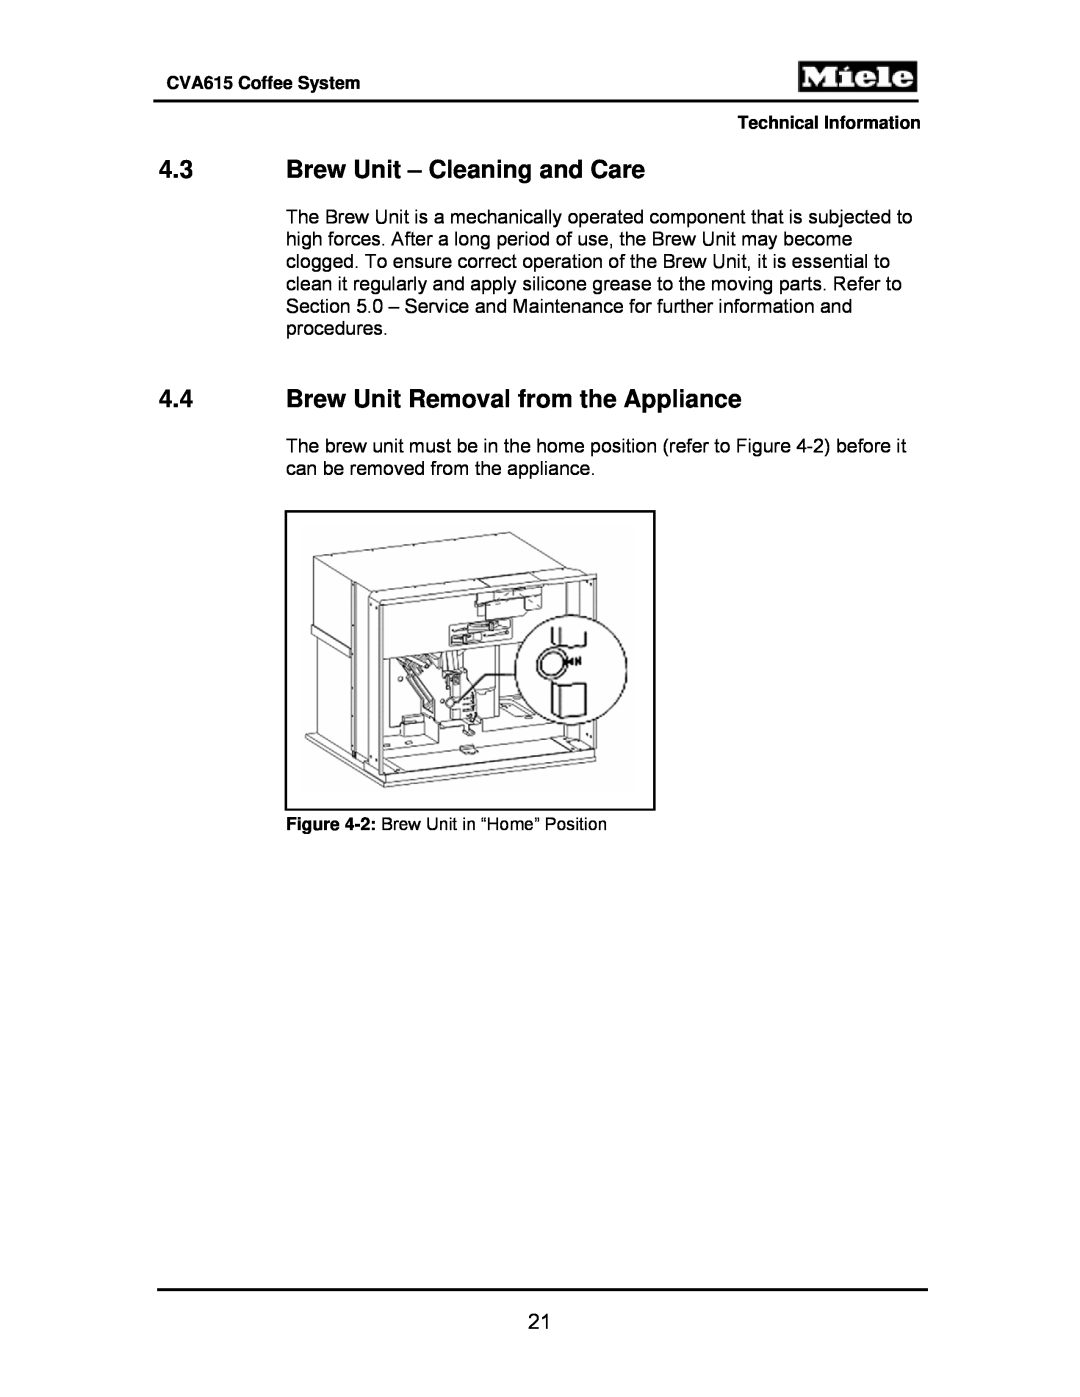 Miele CVA615 4.3Brew Unit – Cleaning and Care, 4.4Brew Unit Removal from the Appliance, 2: Brew Unit in “Home” Position 